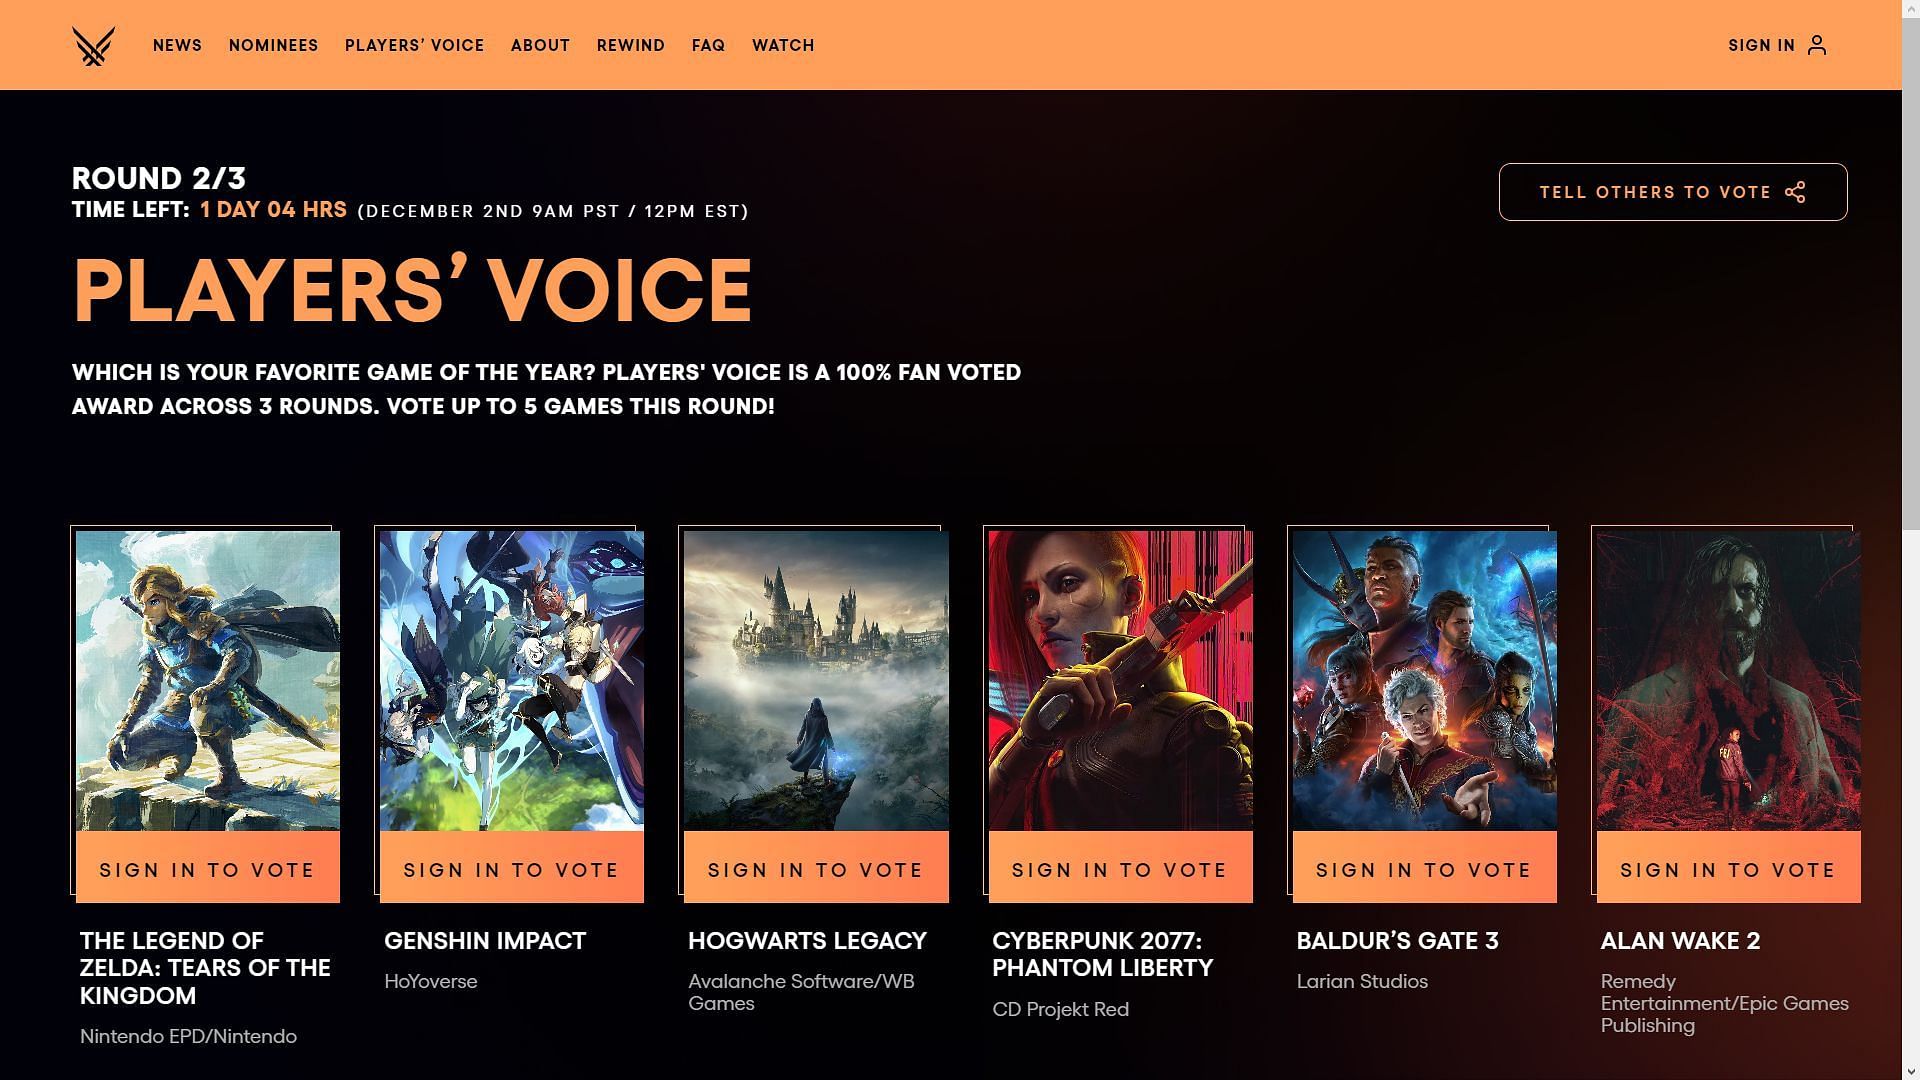 How To Vote In The 2023 Game Awards